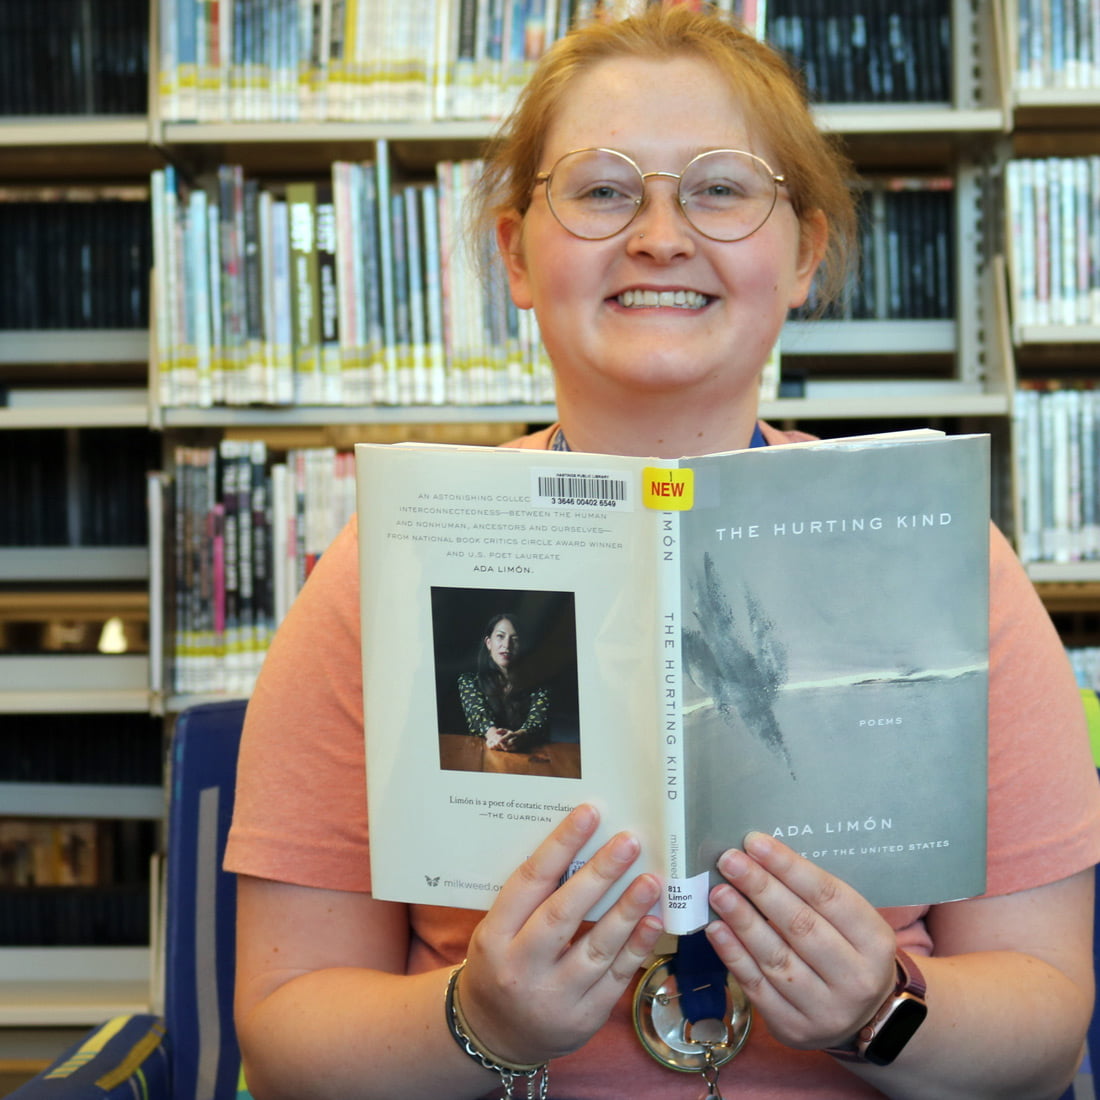 By providing creative and immersive reading programs for kids throughout the year, Riley Felton ‘22 has forged a path for the Hastings Public Library.